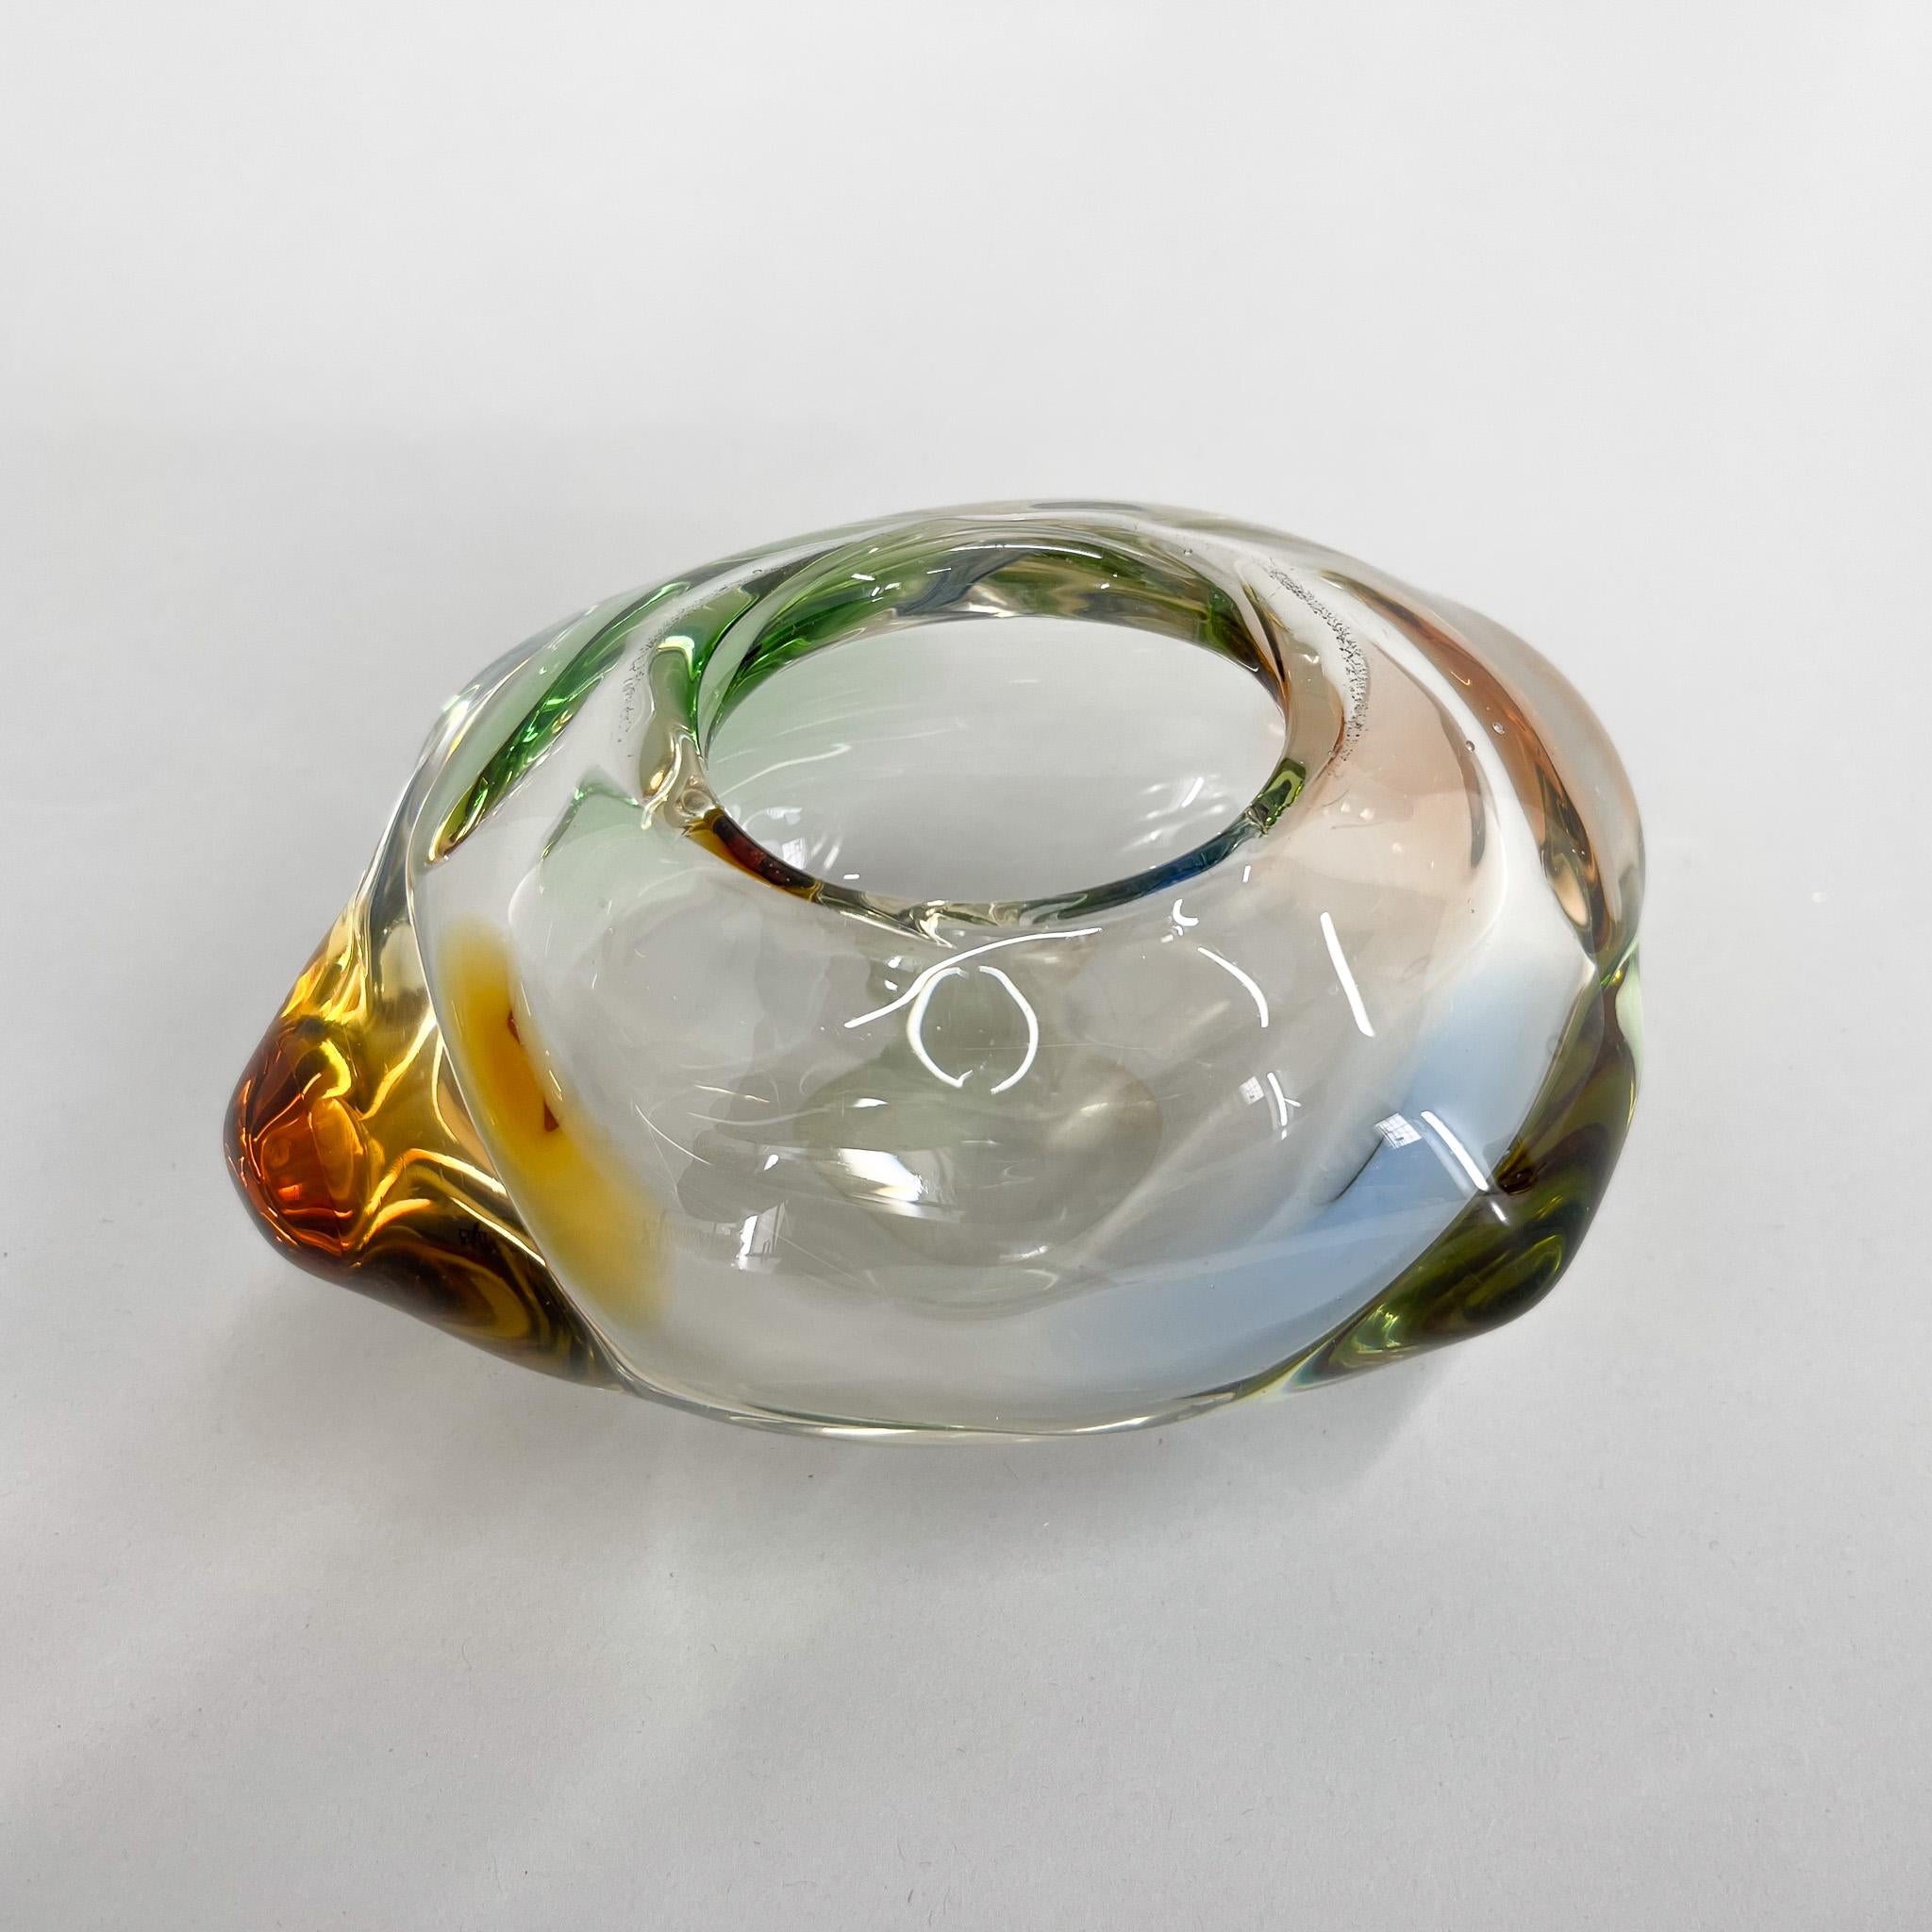 Beautiful small midcentury coloured art glass bowl designed by Frantisek Zemek and produced by Mstisov Glassworks in 1960s. The piece is from the Rhapsody collection. 
There are some signs of use (see photo).